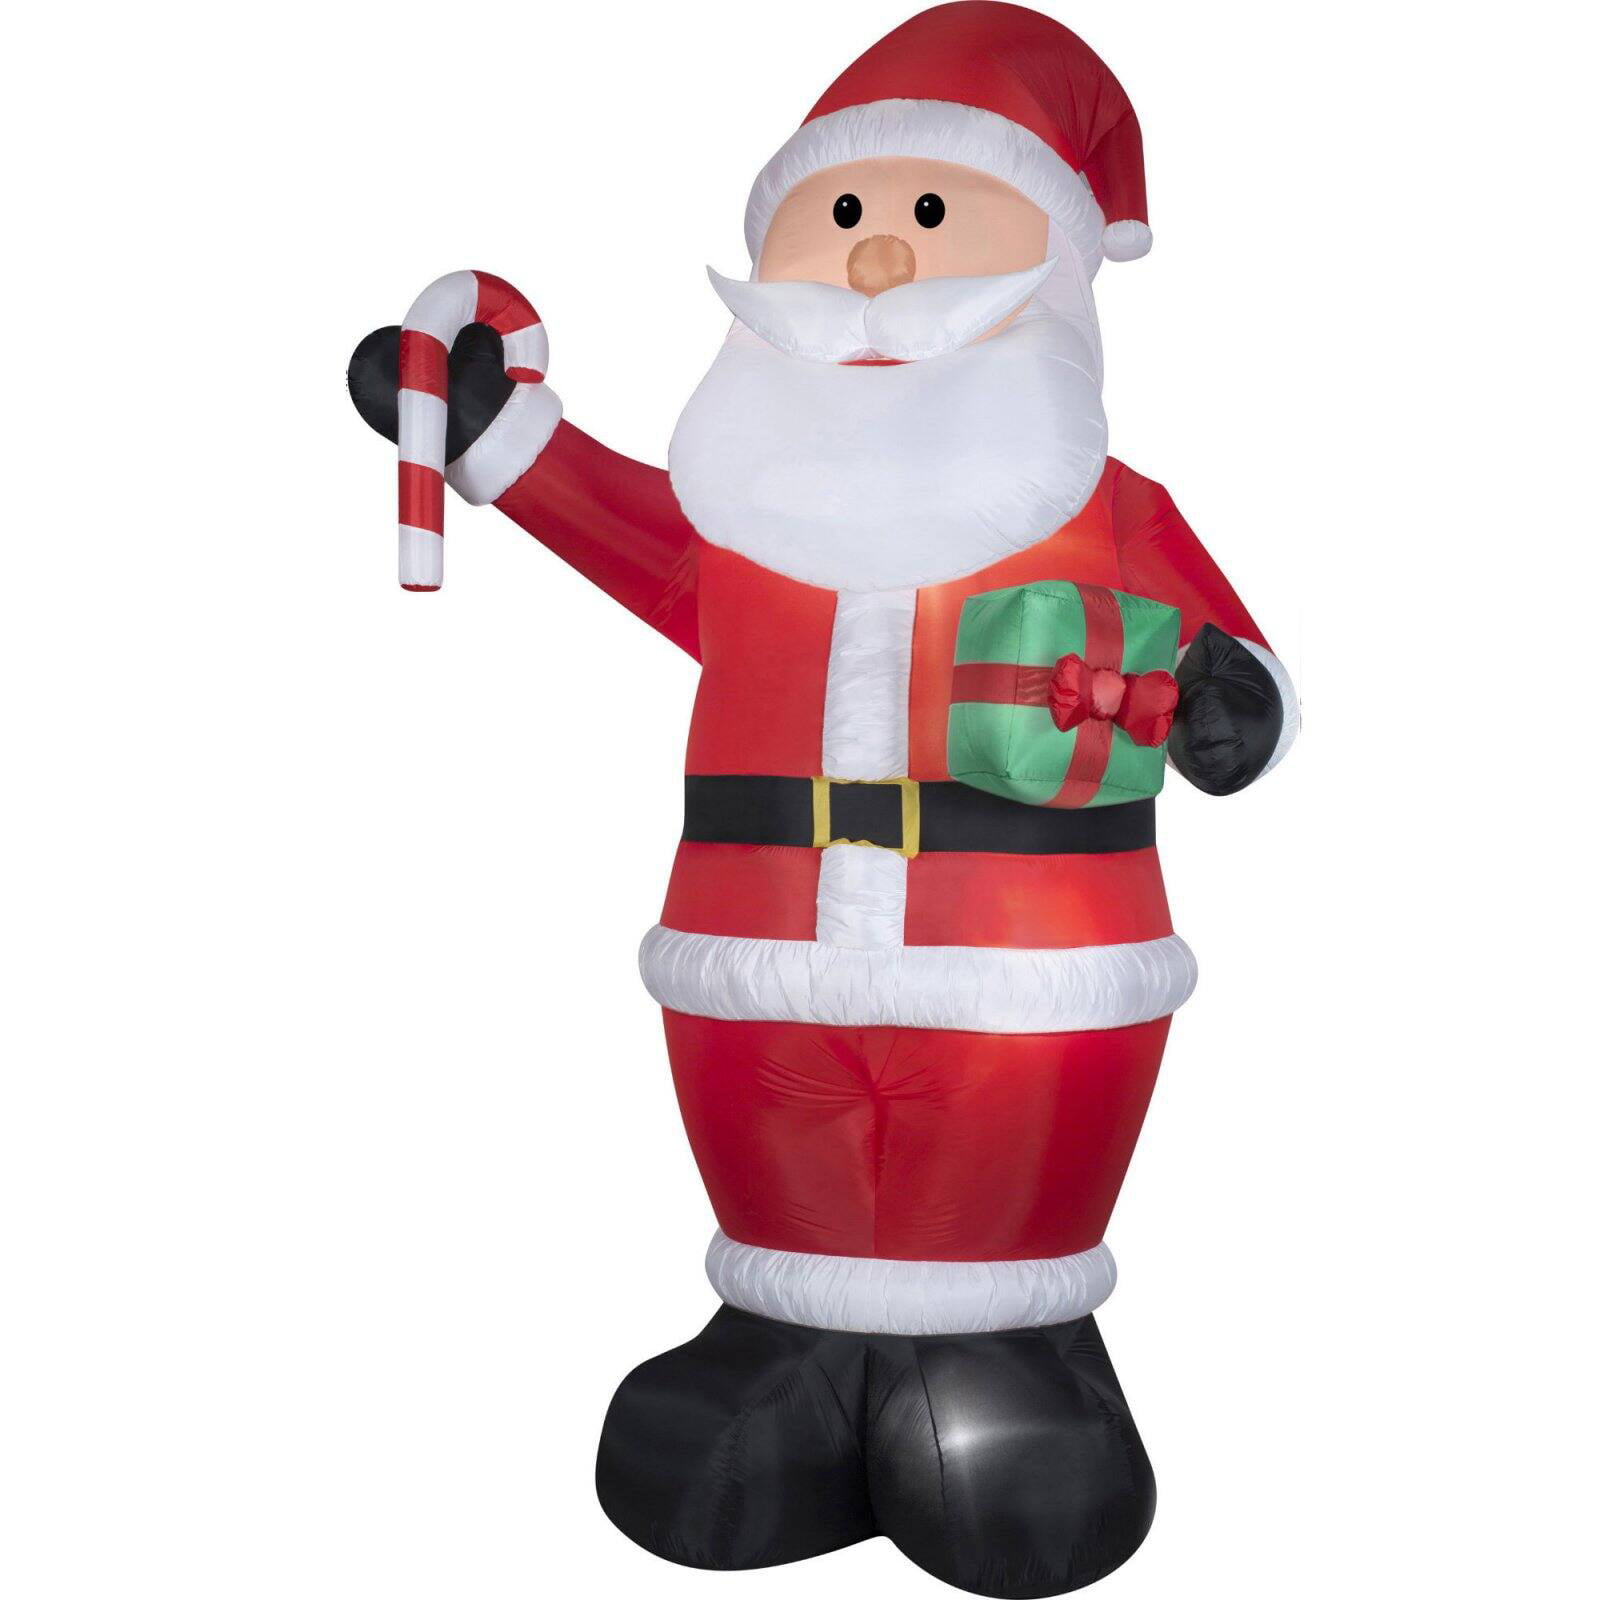 Santa Gift and Candy Cane Airblown Christmas Decoration - Walmart.com